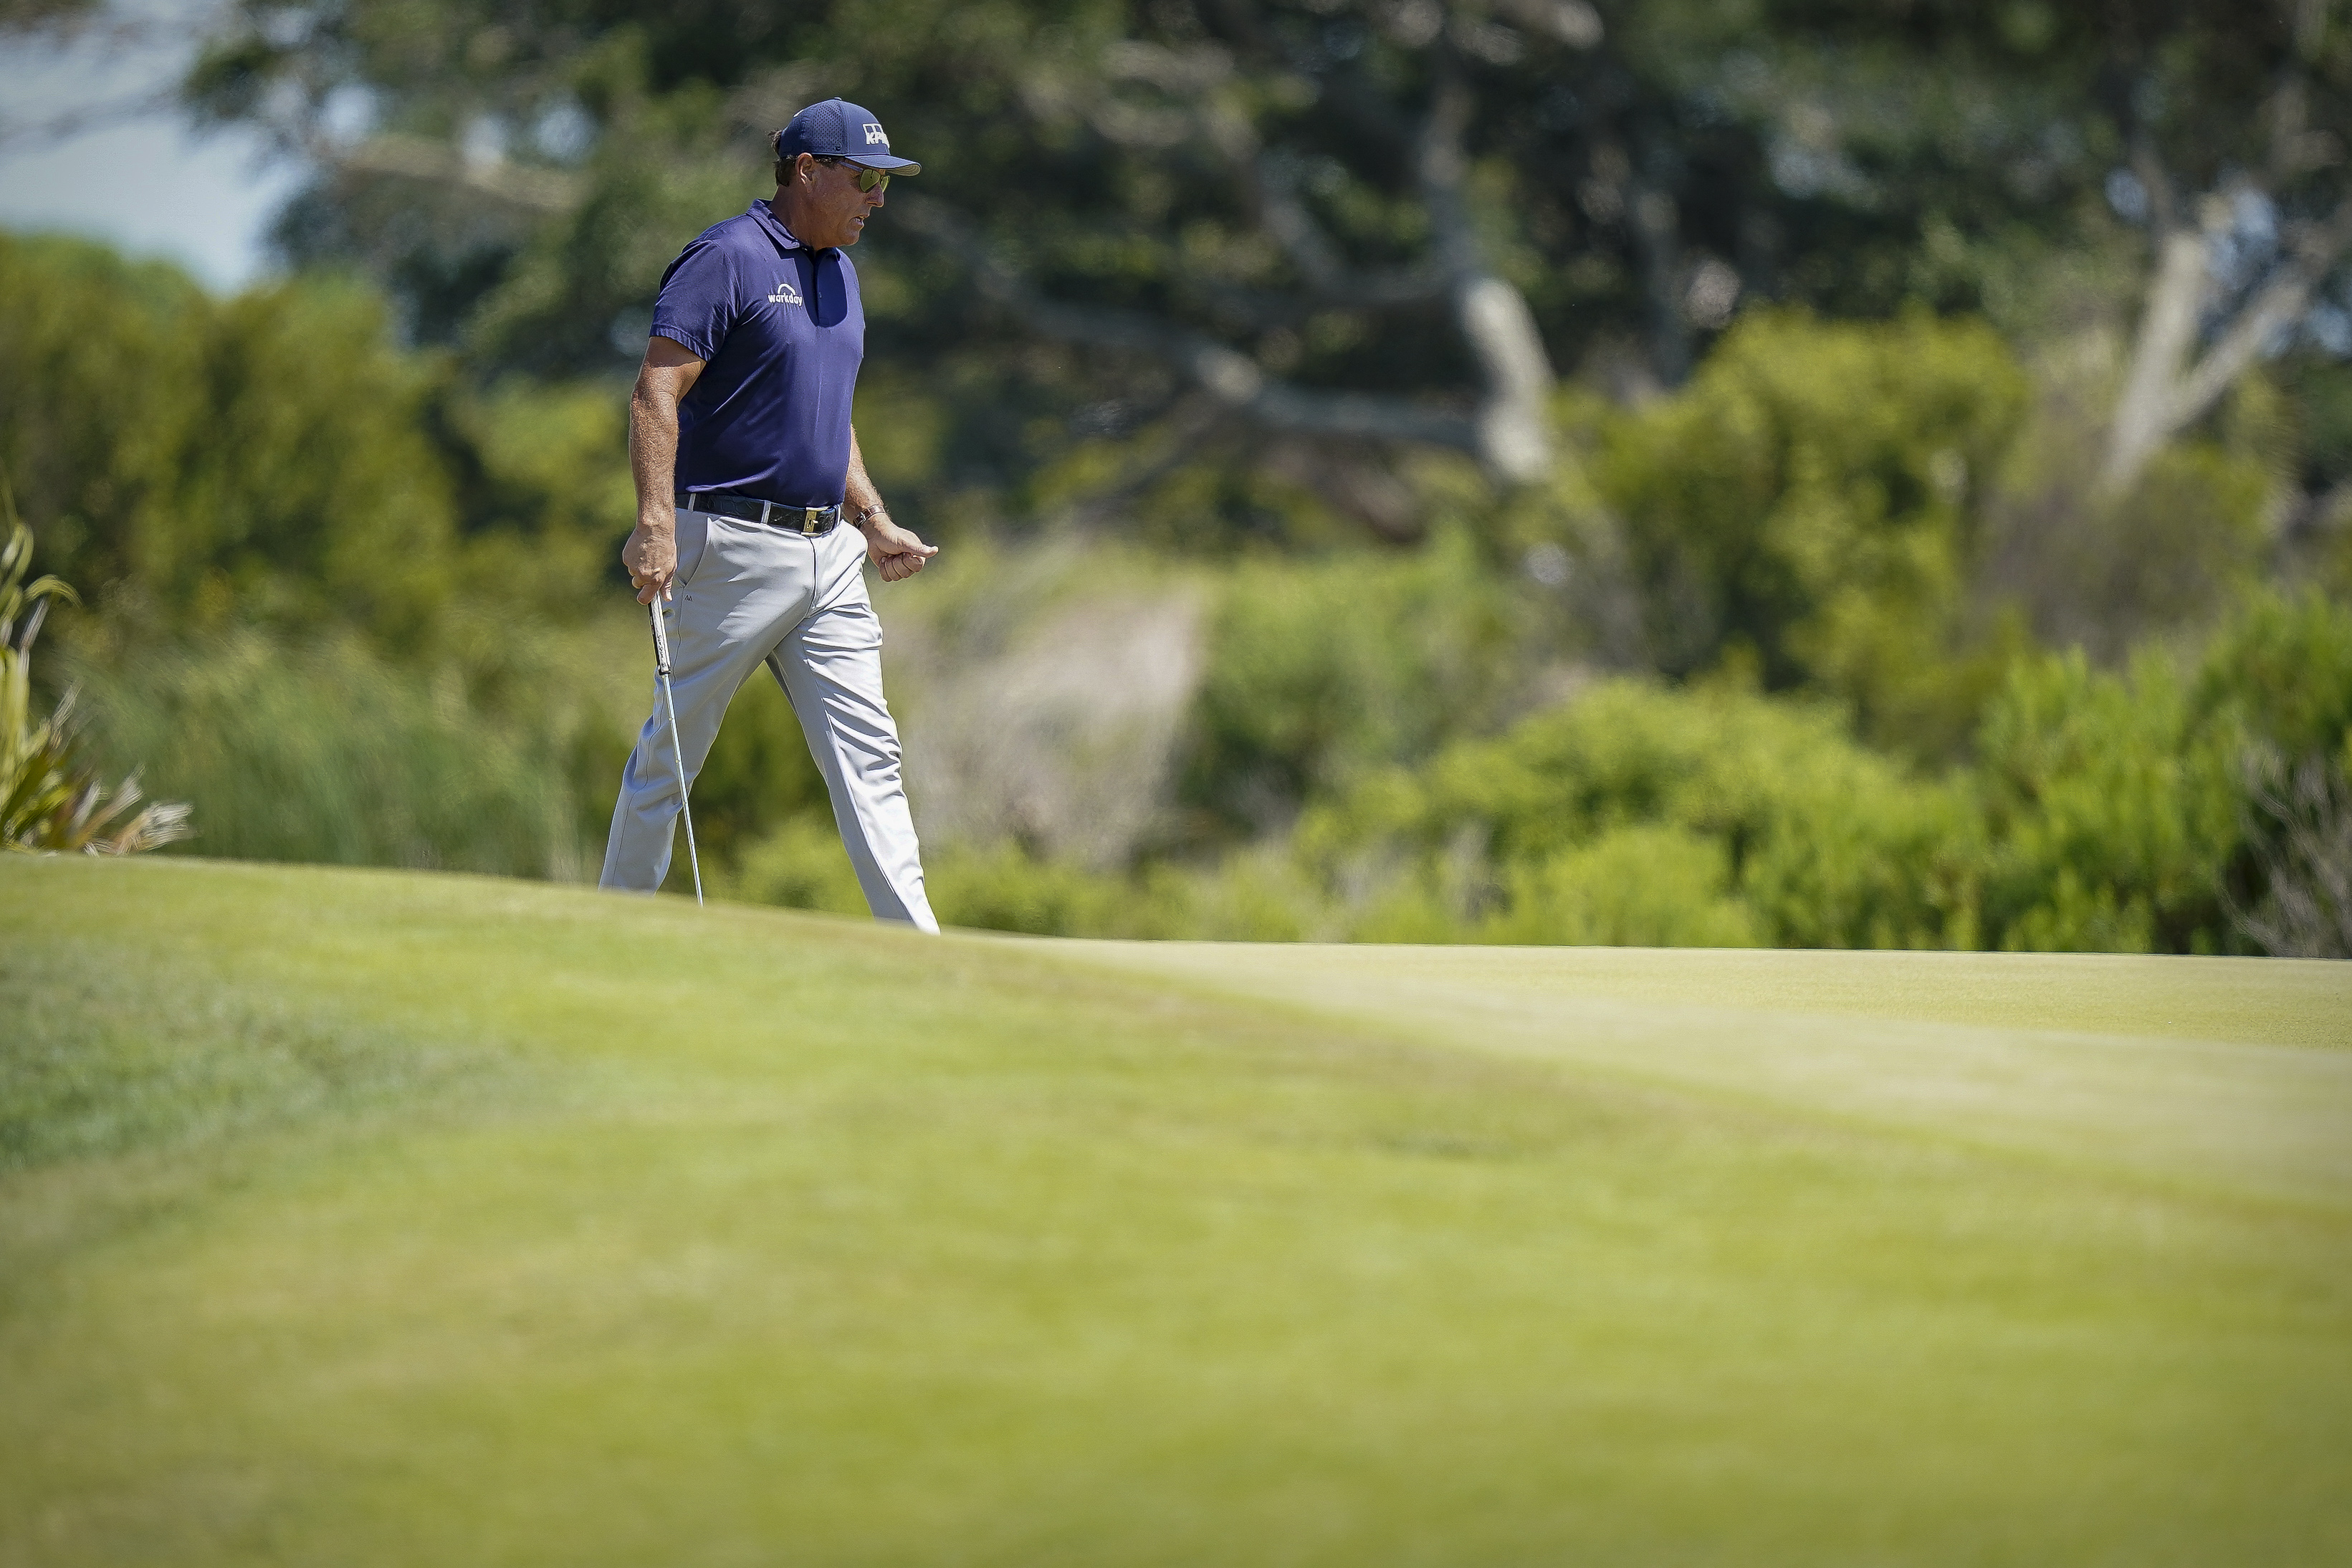 May 23, 2021; Kiawah Island, South Carolina, USA; Phil Mickelson walks to the 2nd green during the final round of the PGA Championship golf tournament. Mandatory Credit: David Yeazell-USA TODAY Sports